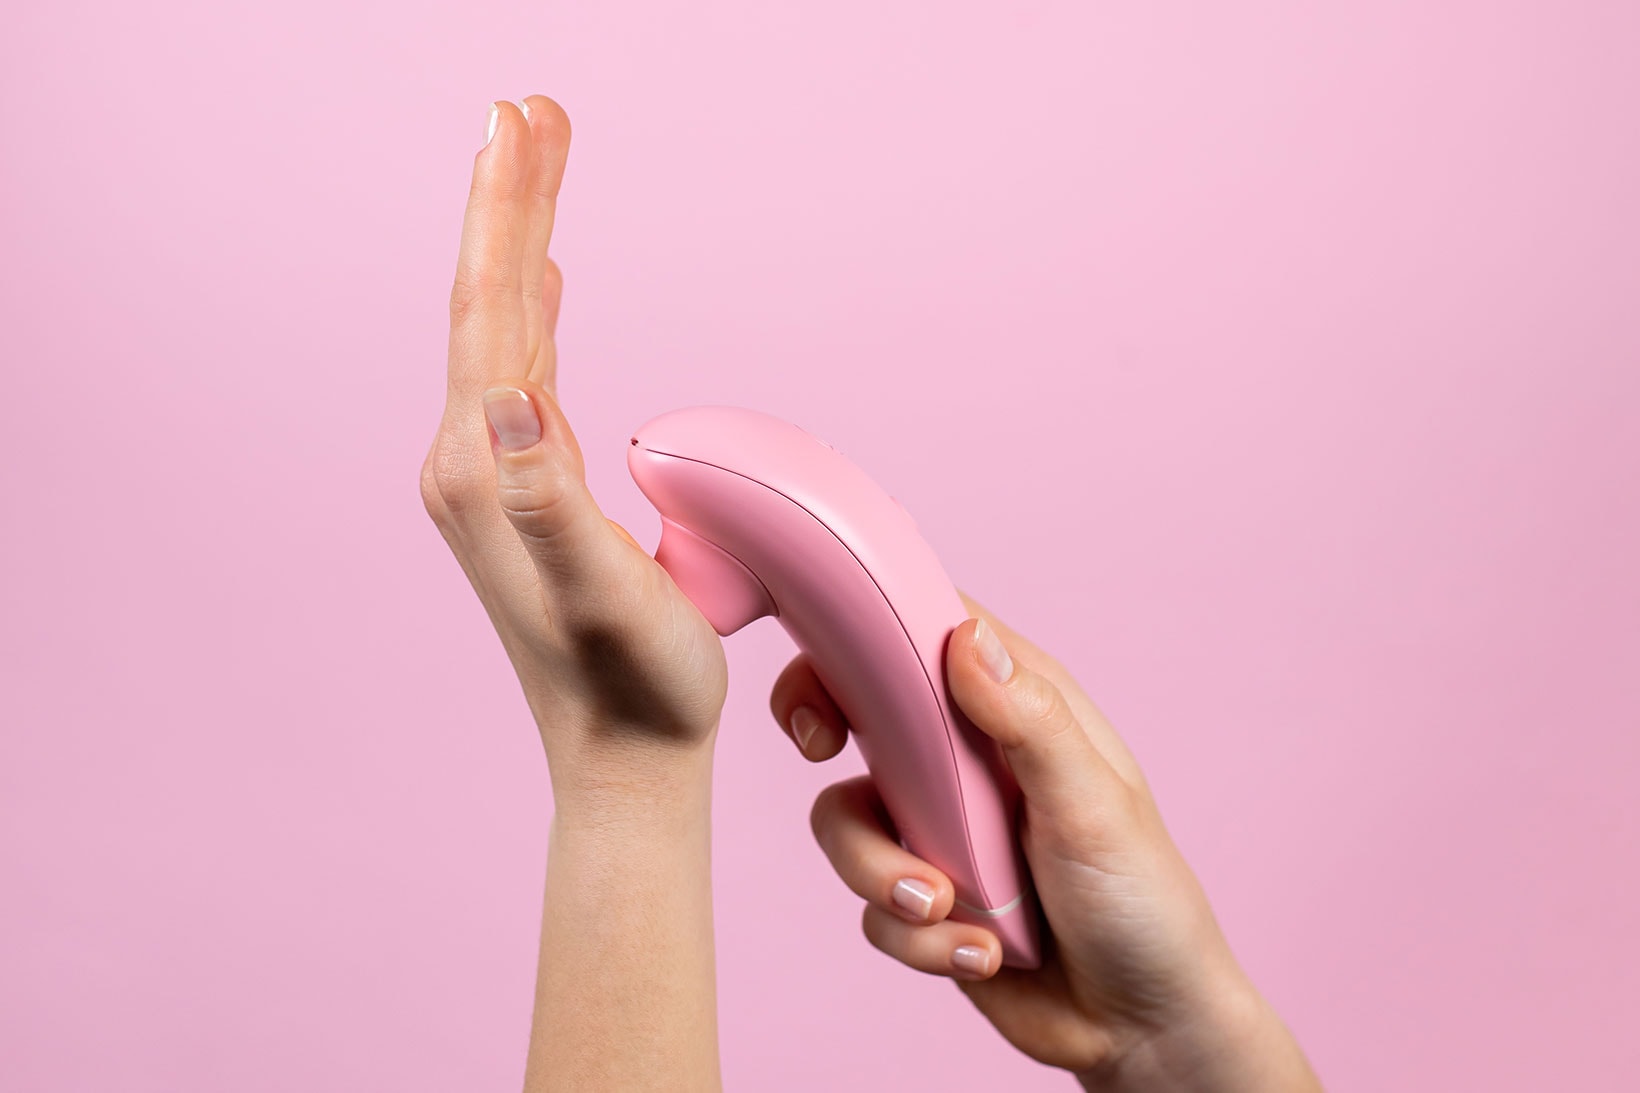 Womanizer Launches Crowdfund For Sustainable Sex Toy Sexual Wellness Vibrator Technology